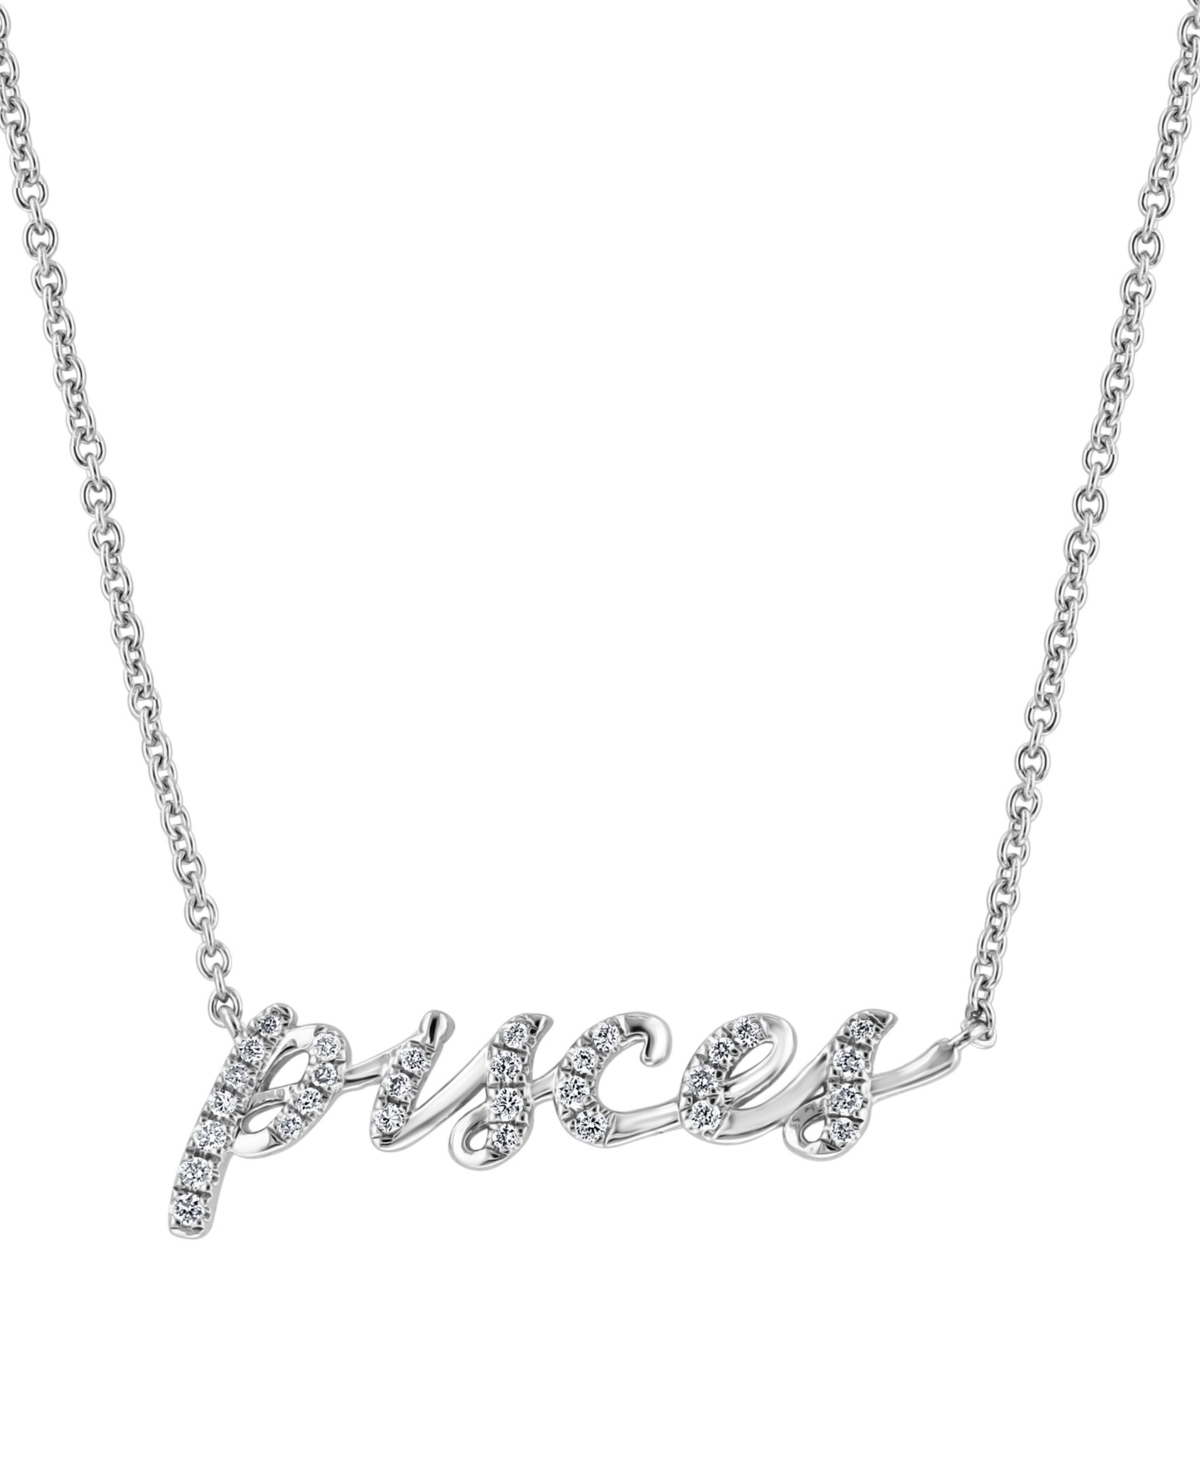 Effy Diamond Zodiac Pisces 18" Pendant Necklace (1/10 ct. t.w.) in Sterling Silver - Sterling Silver